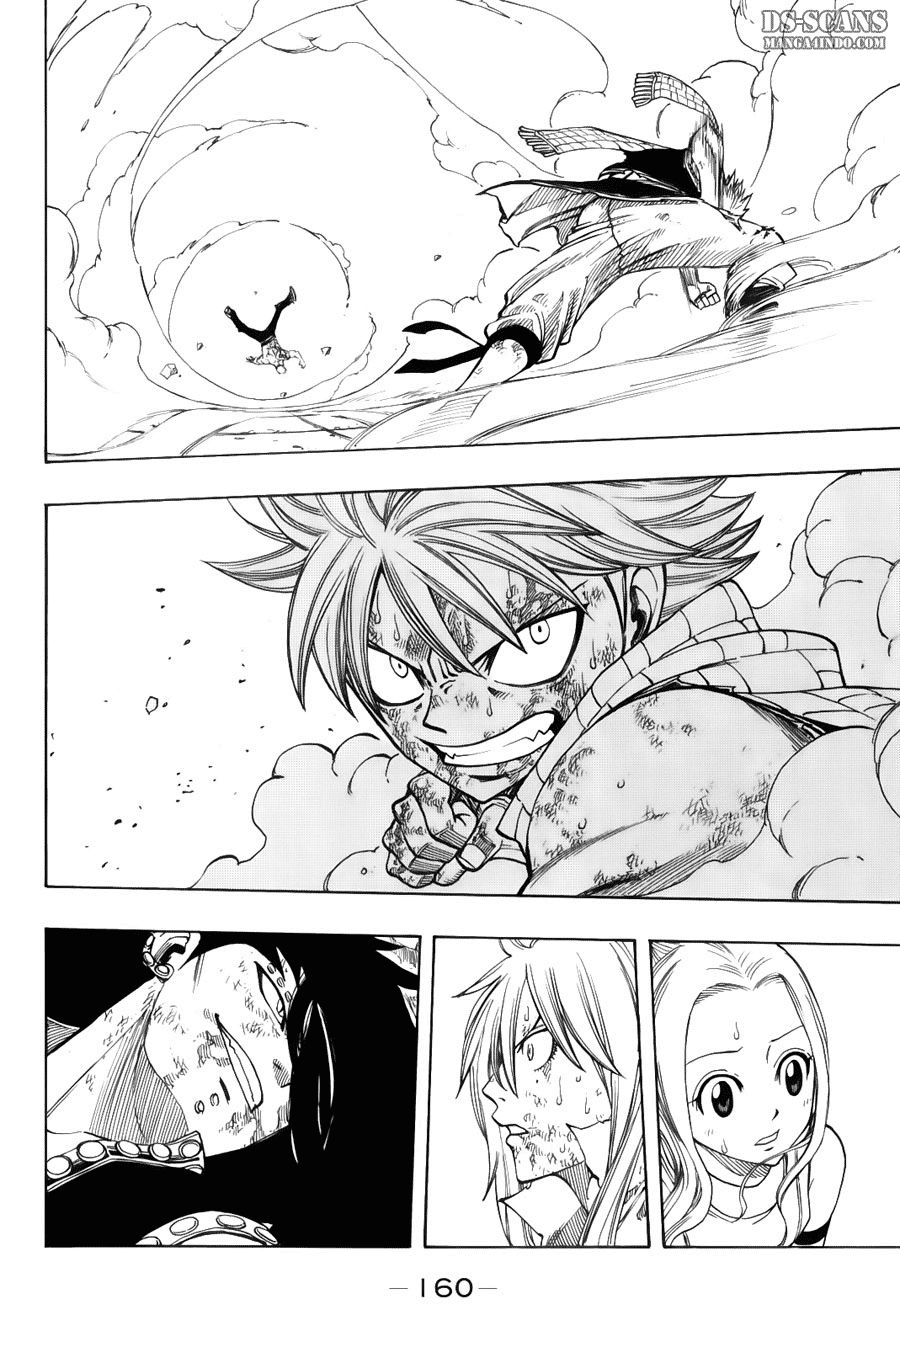 Fairy Tail Chapter 126